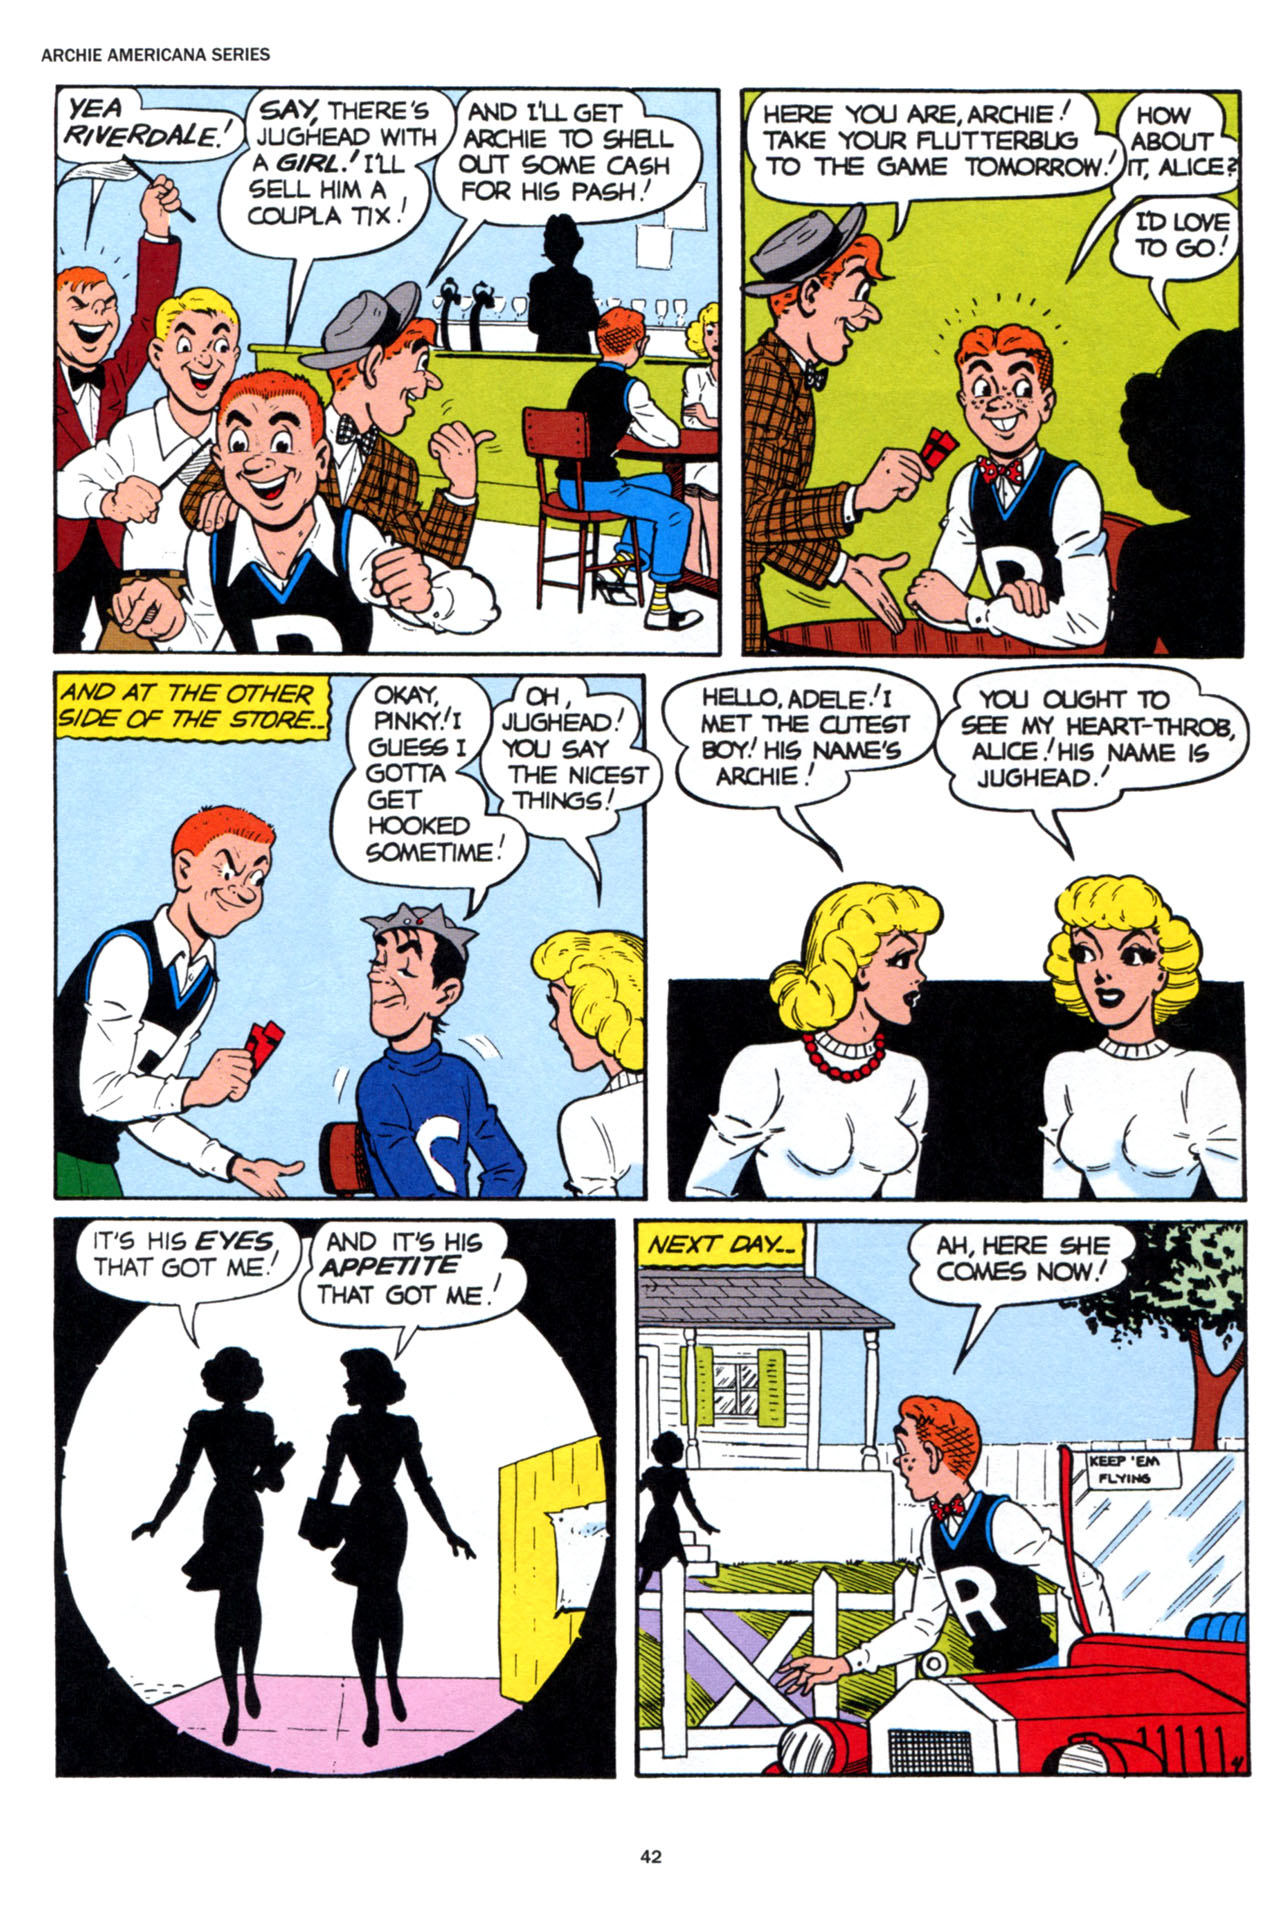 Read online Archie Americana Series comic -  Issue # TPB 6 - 43